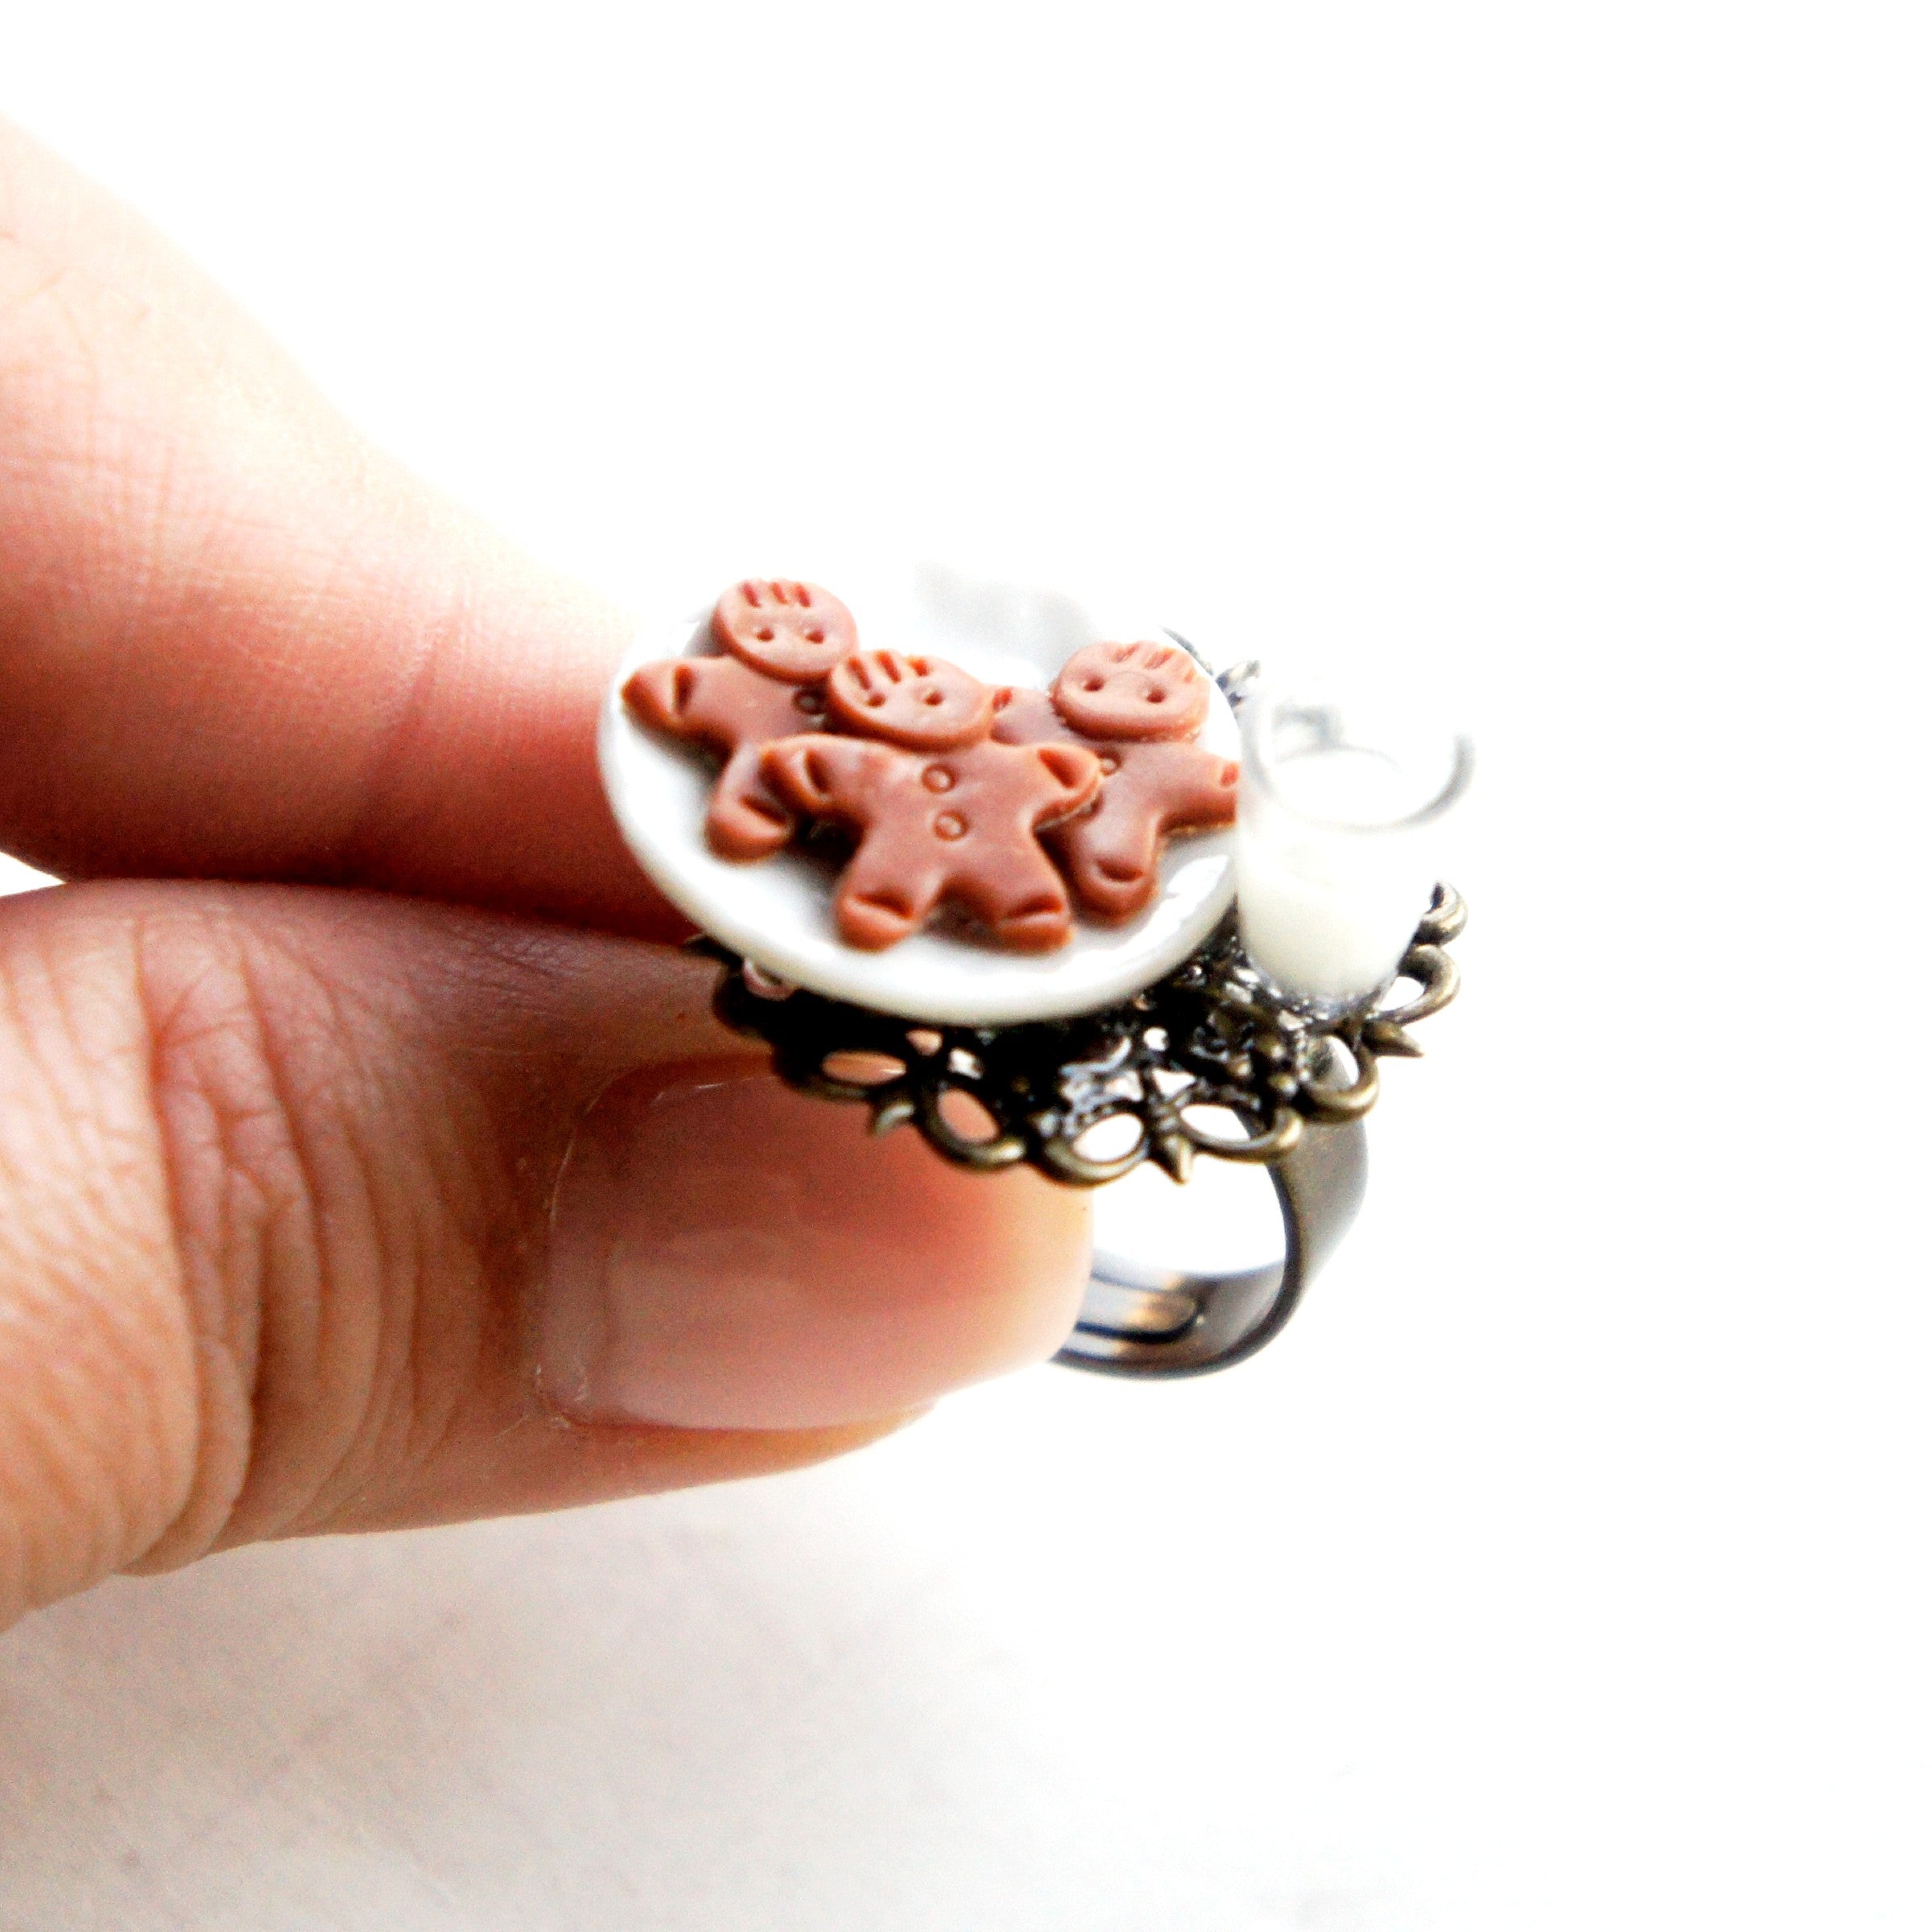 Gingerbread Cookies and Milk Ring - Jillicious charms and accessories